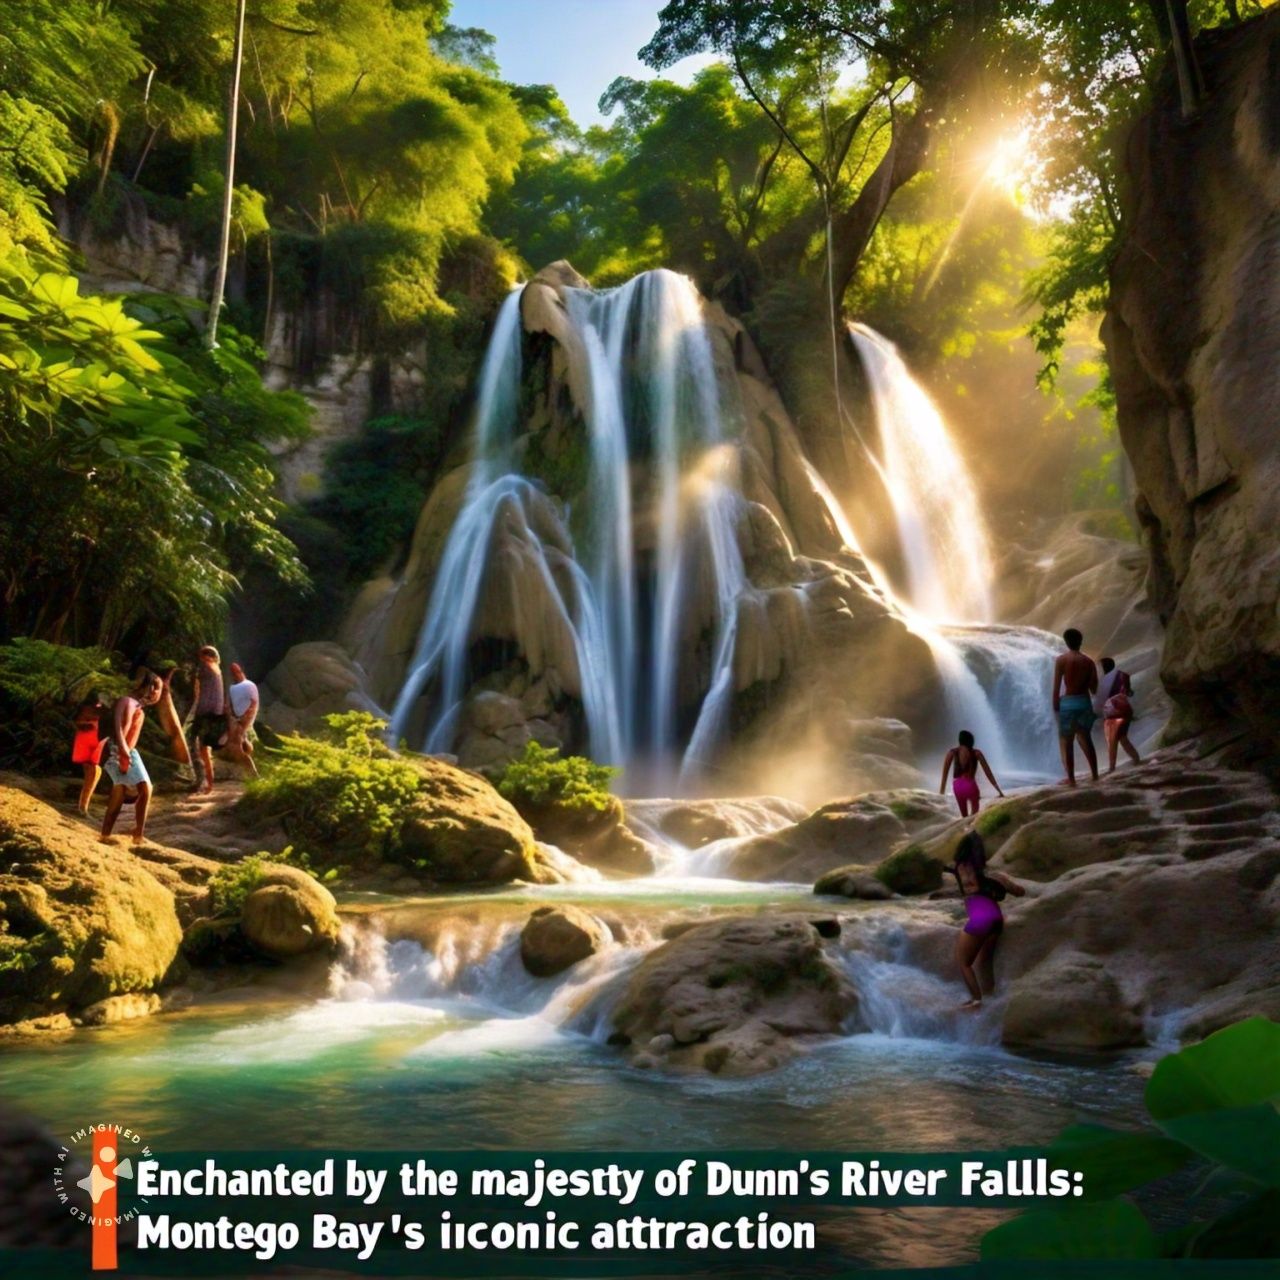 "Enchanted by the majesty of Dunn's River Falls: Montego Bay's iconic attraction."